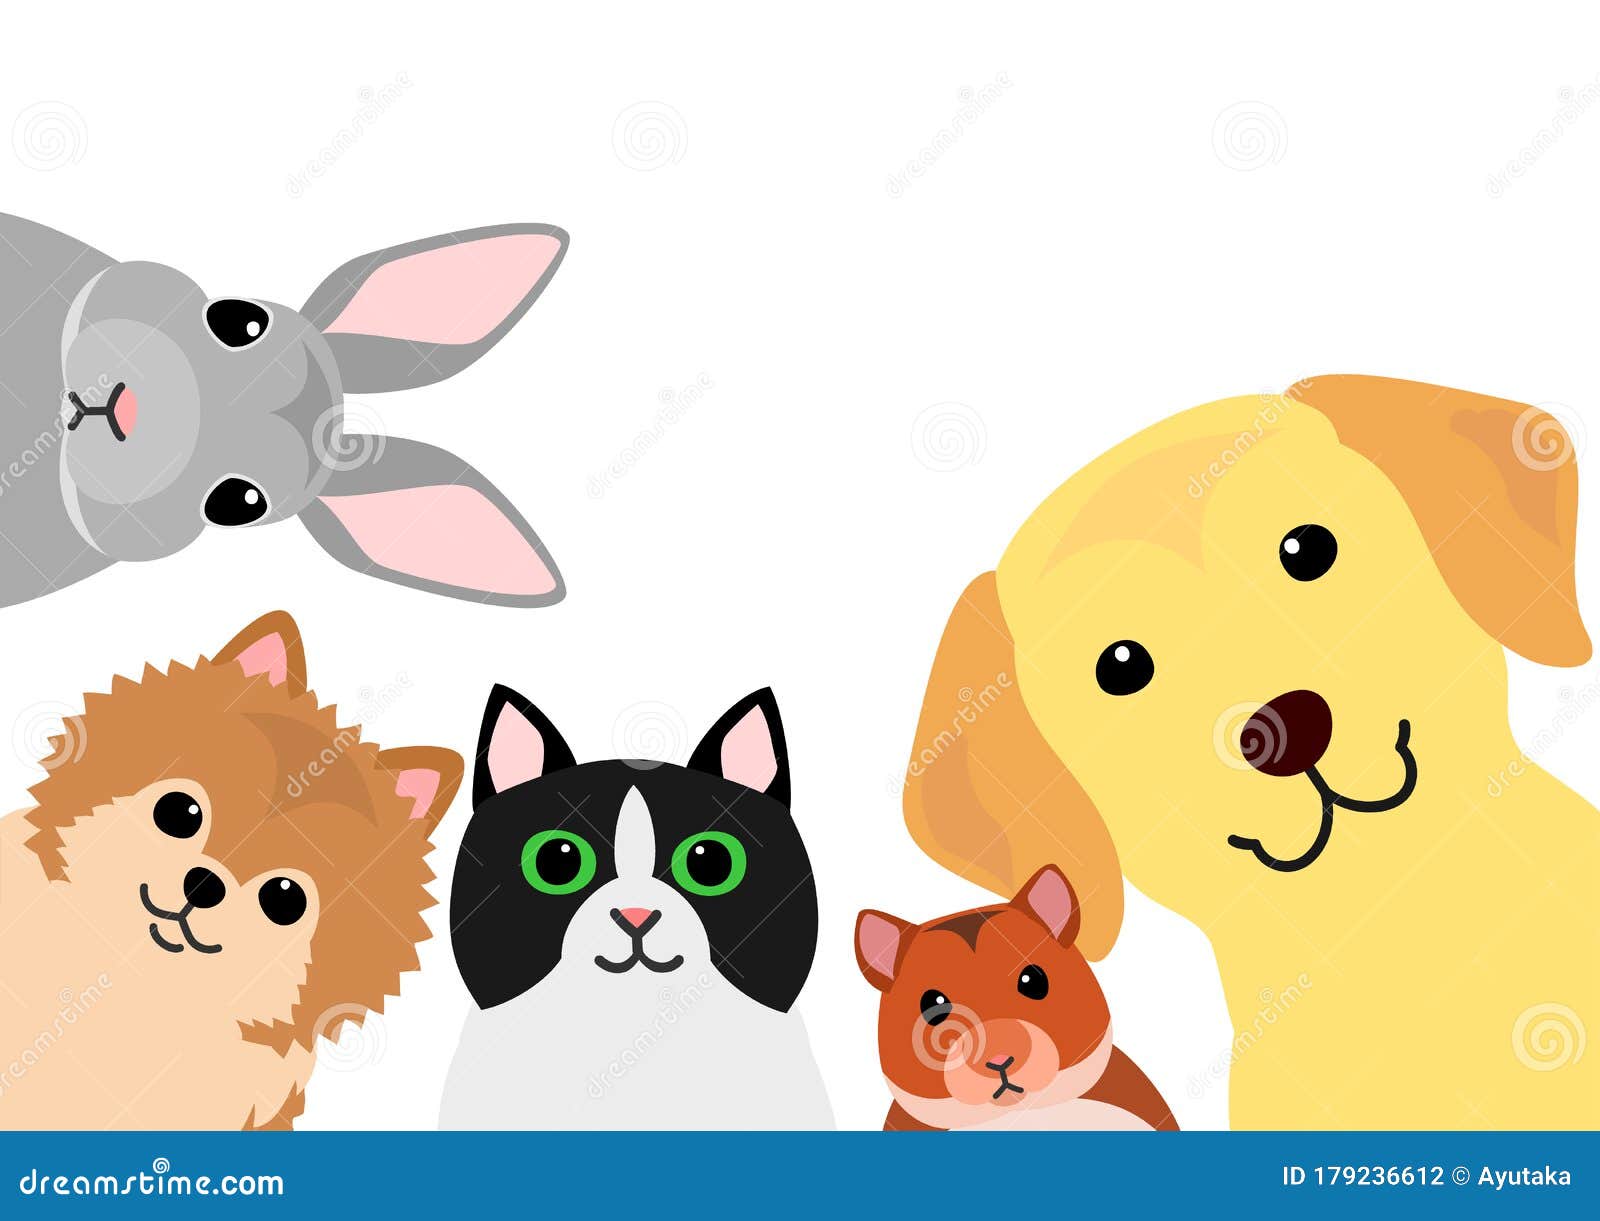 Cute Home Pet Animals Group Stock Vector - Illustration of shop, cute:  179236612